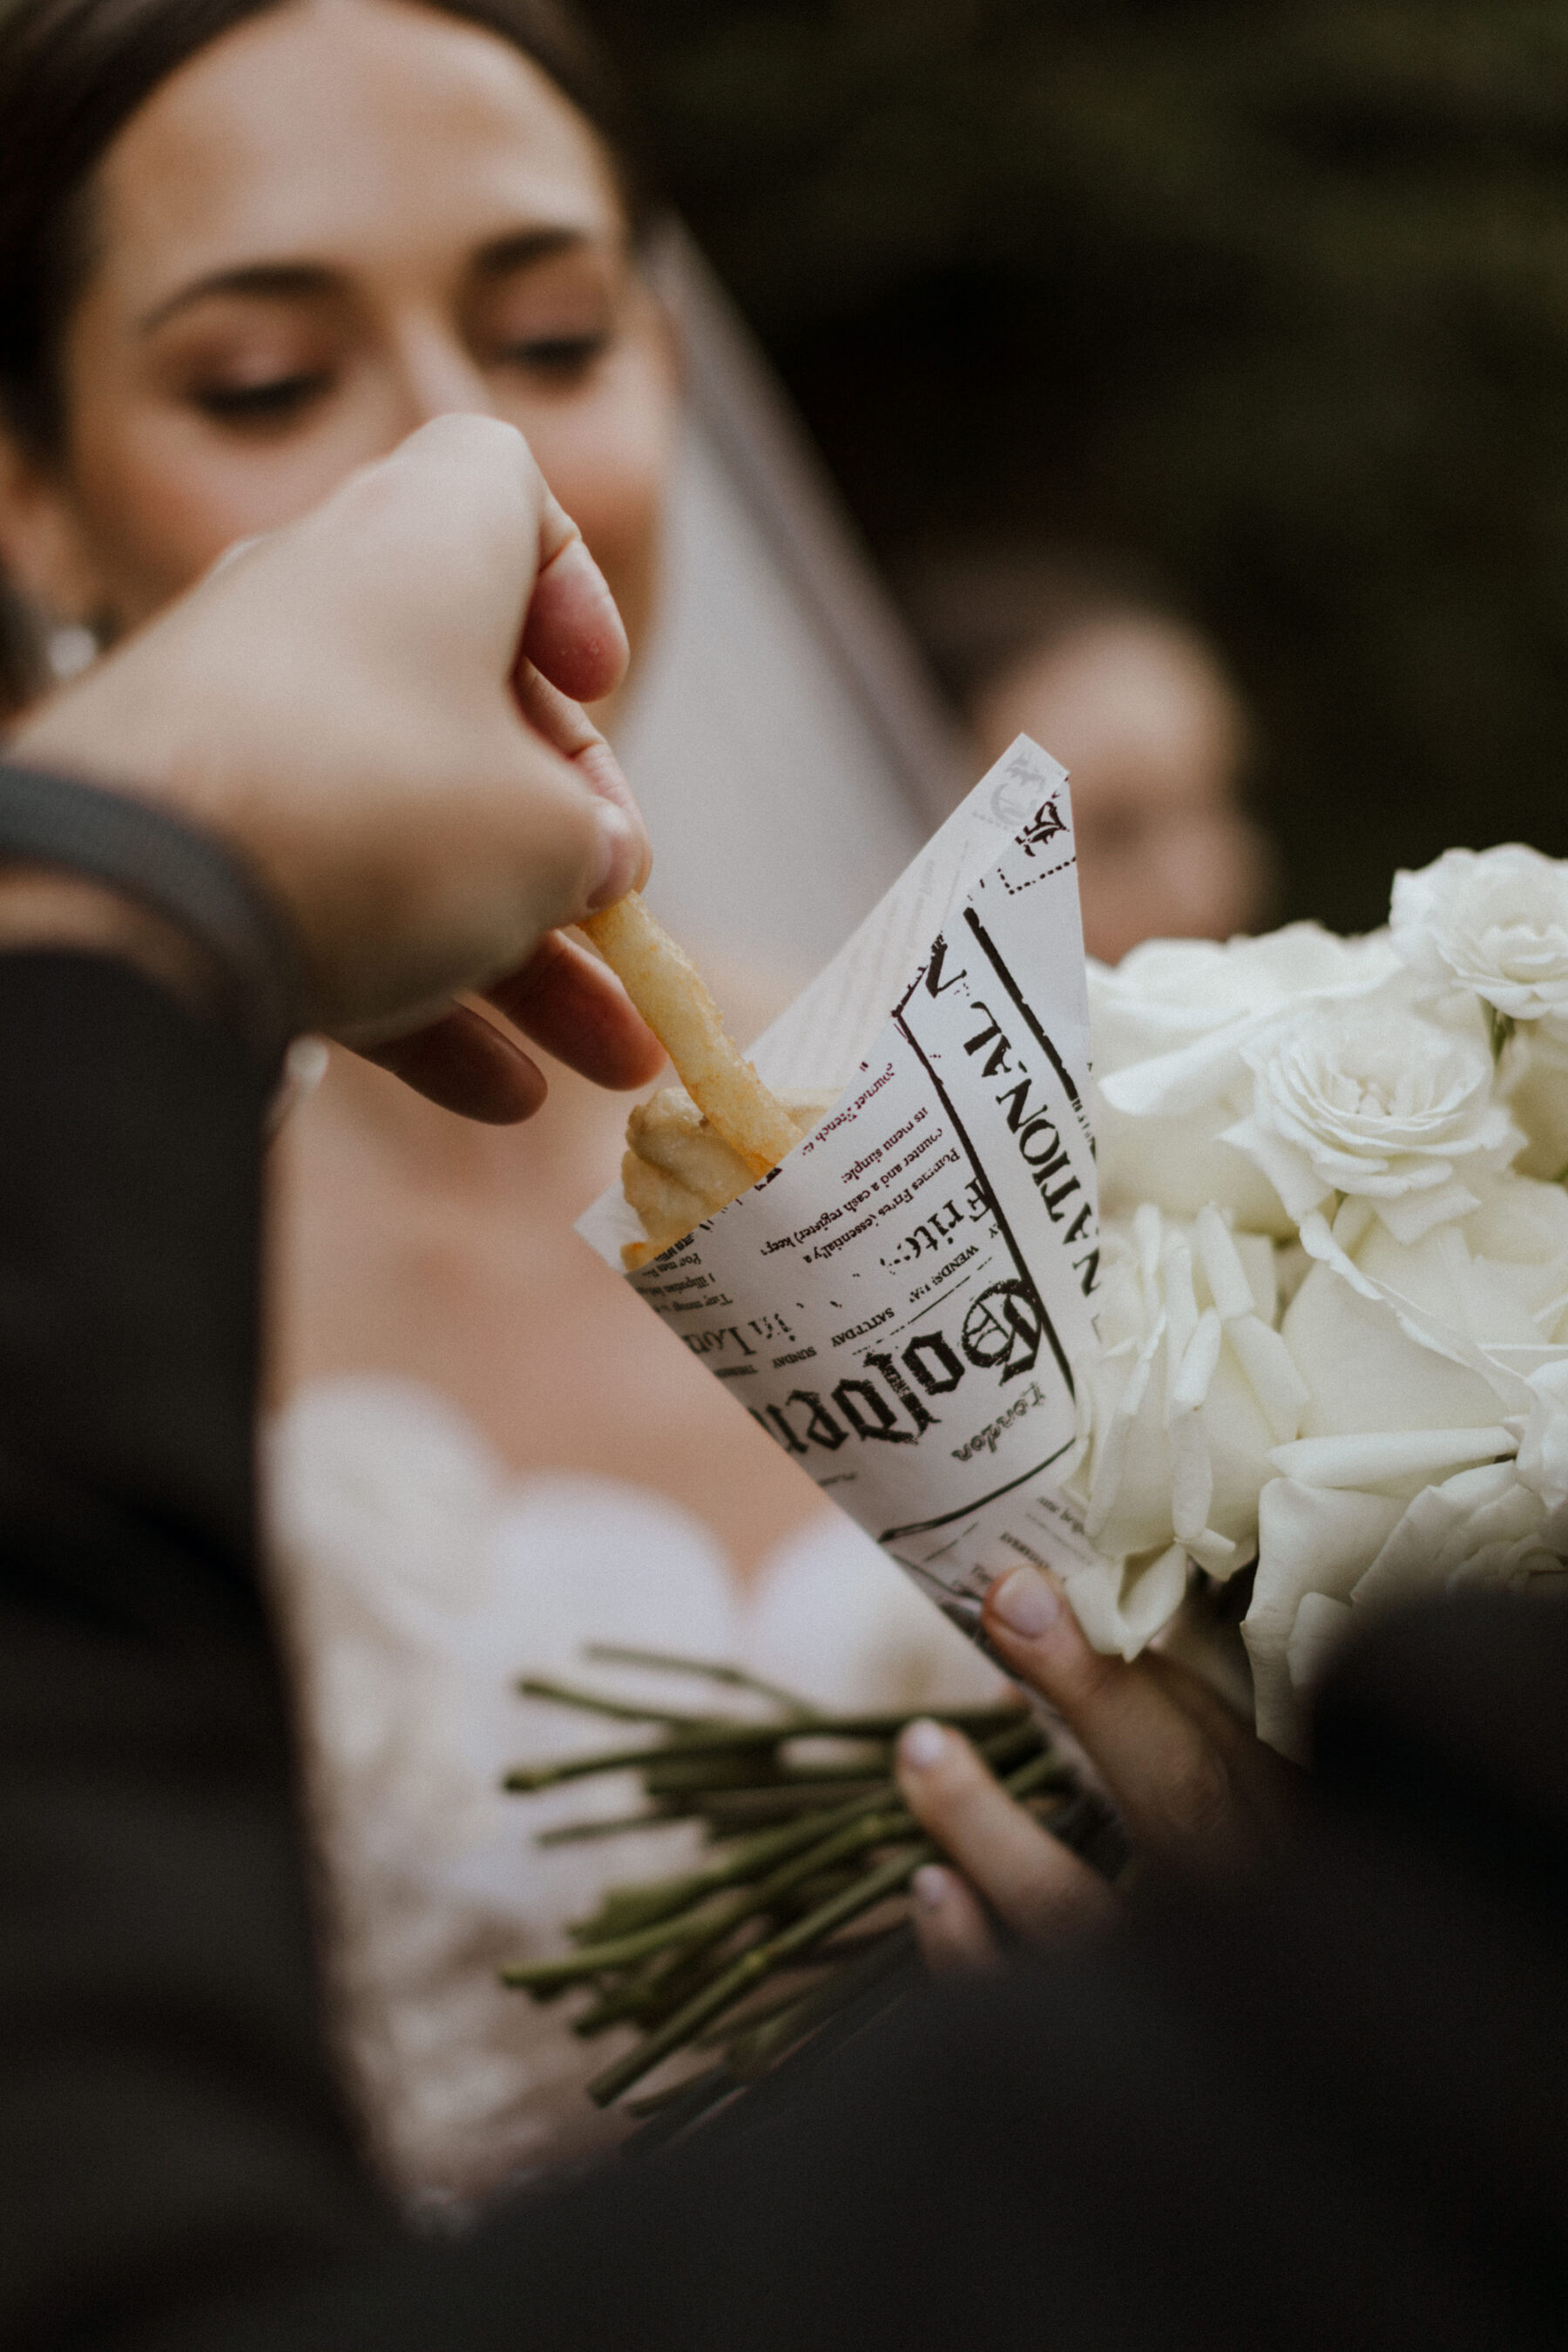 Bride and groom eating mini fish and chips from a newspaper cone.